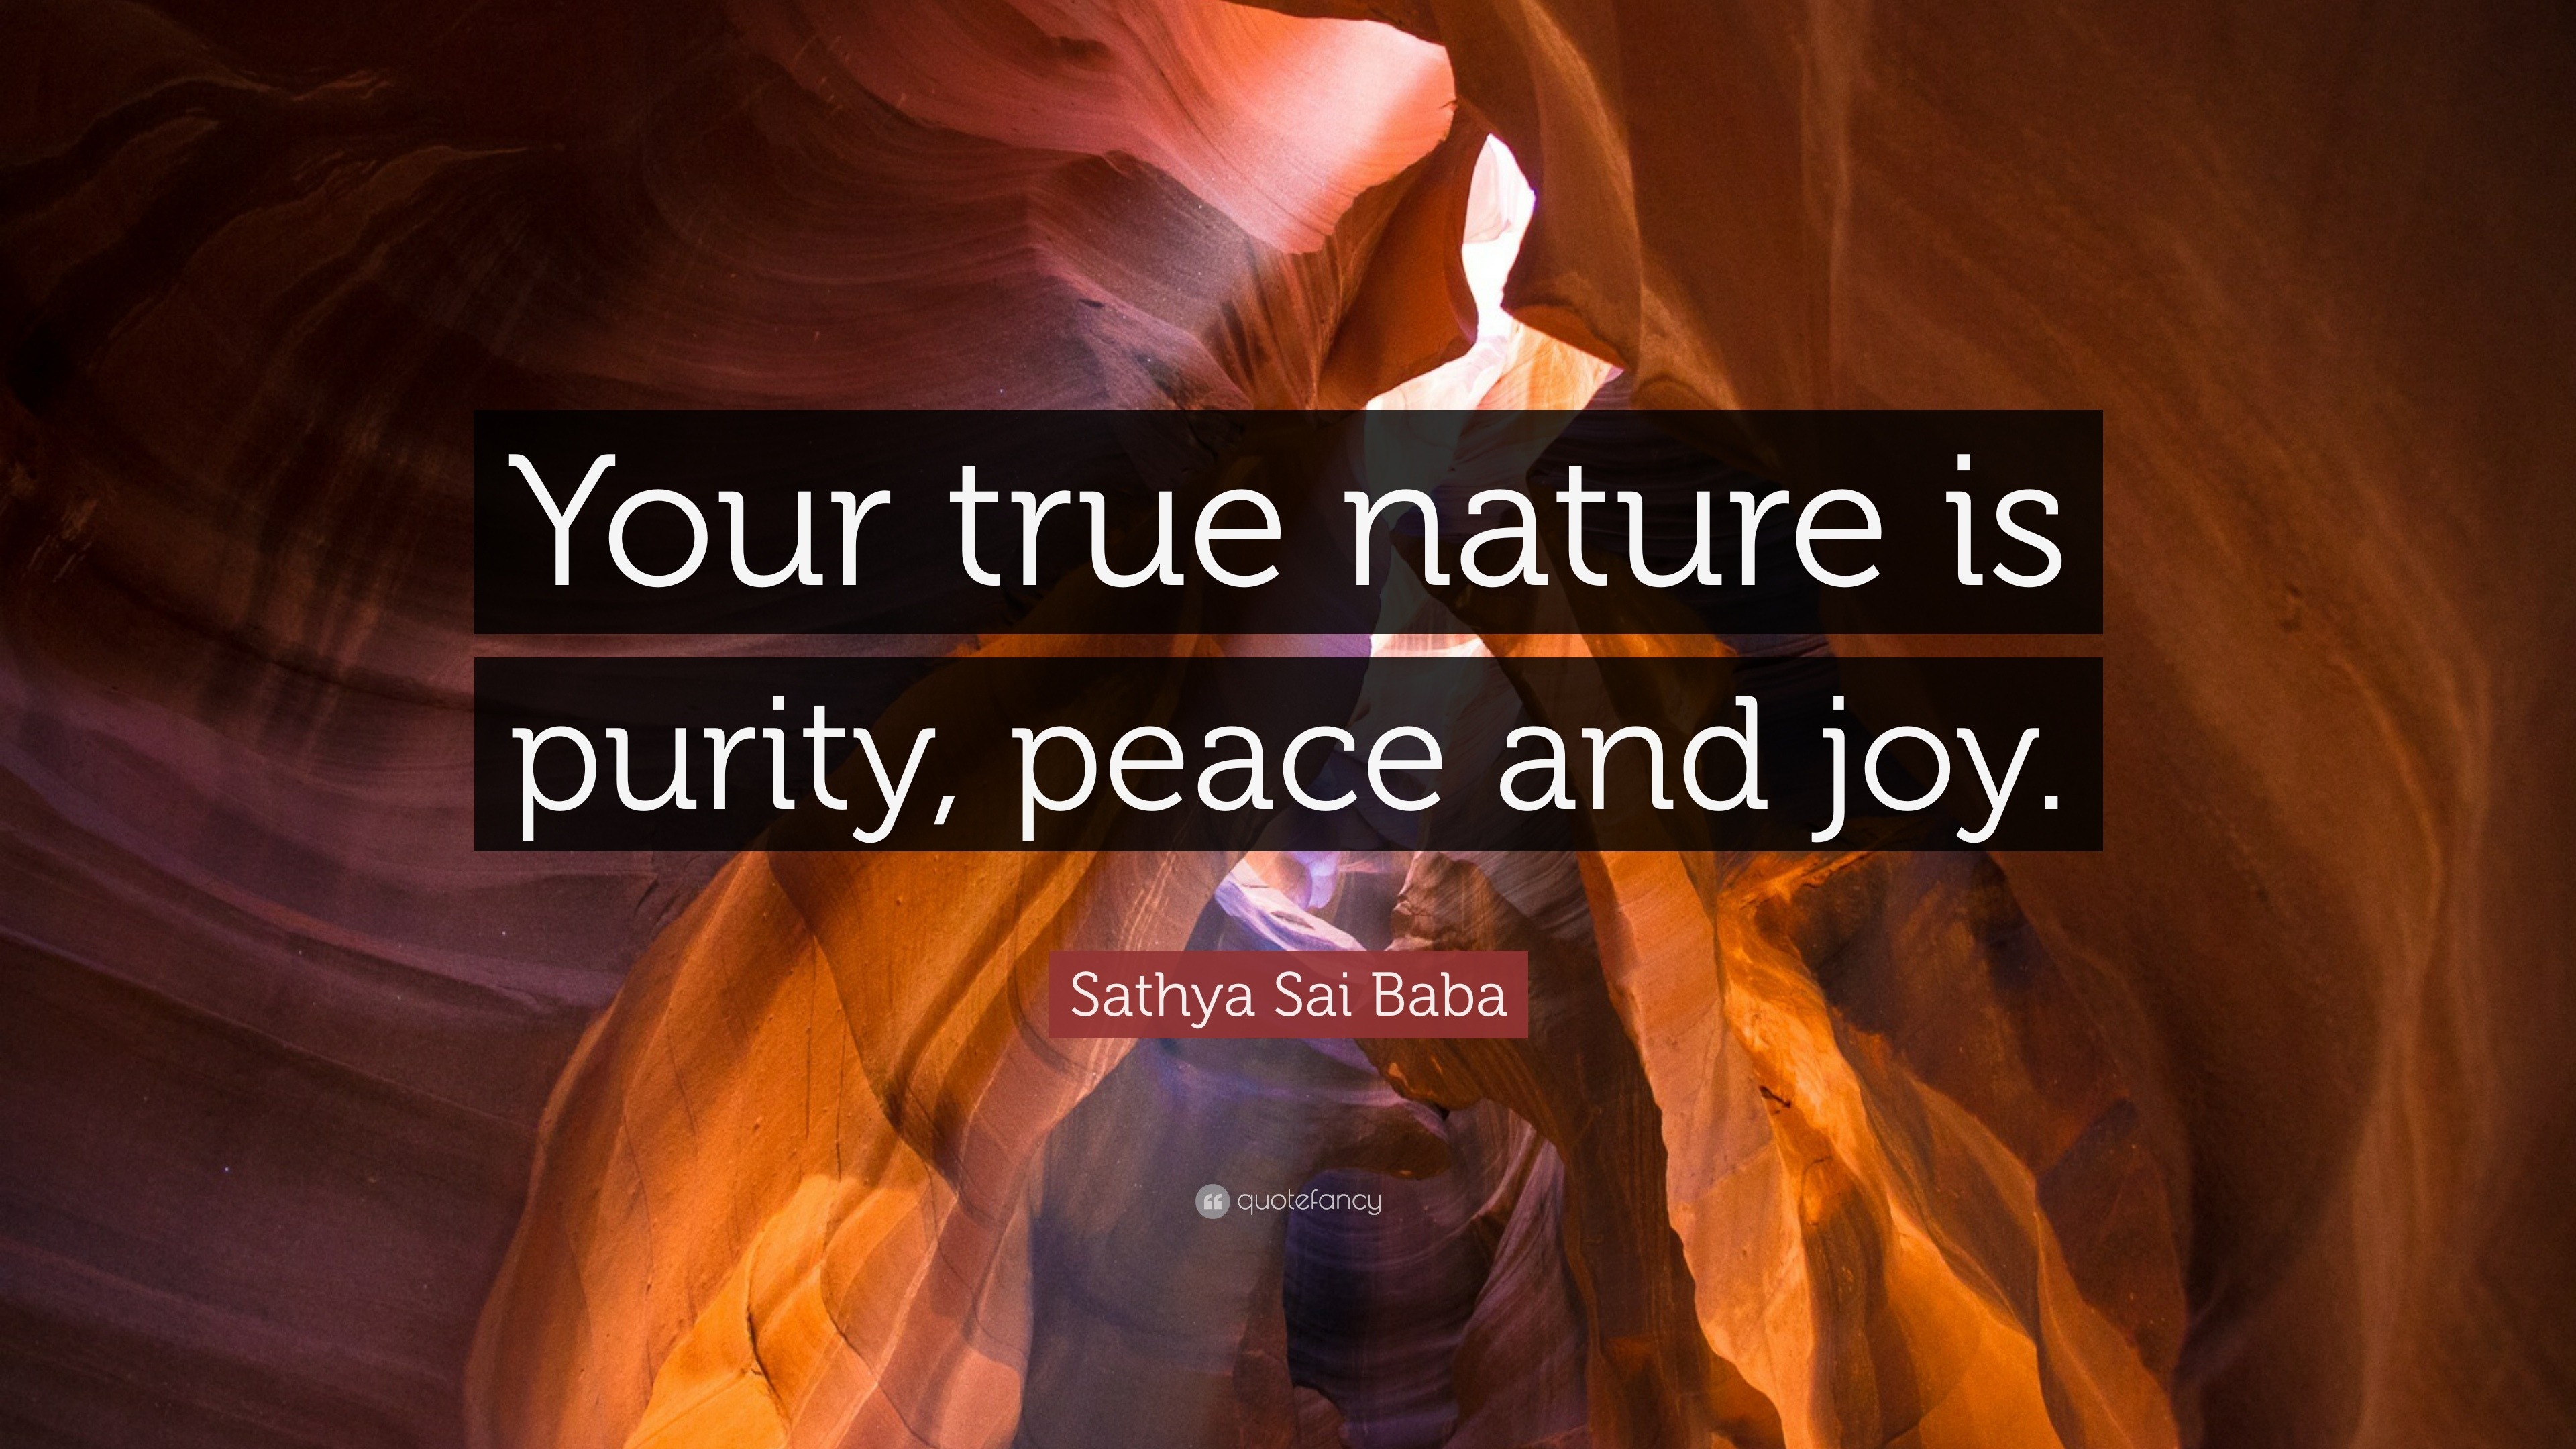 Sathya Sai Baba Quote: "Your true nature is purity, peace ...